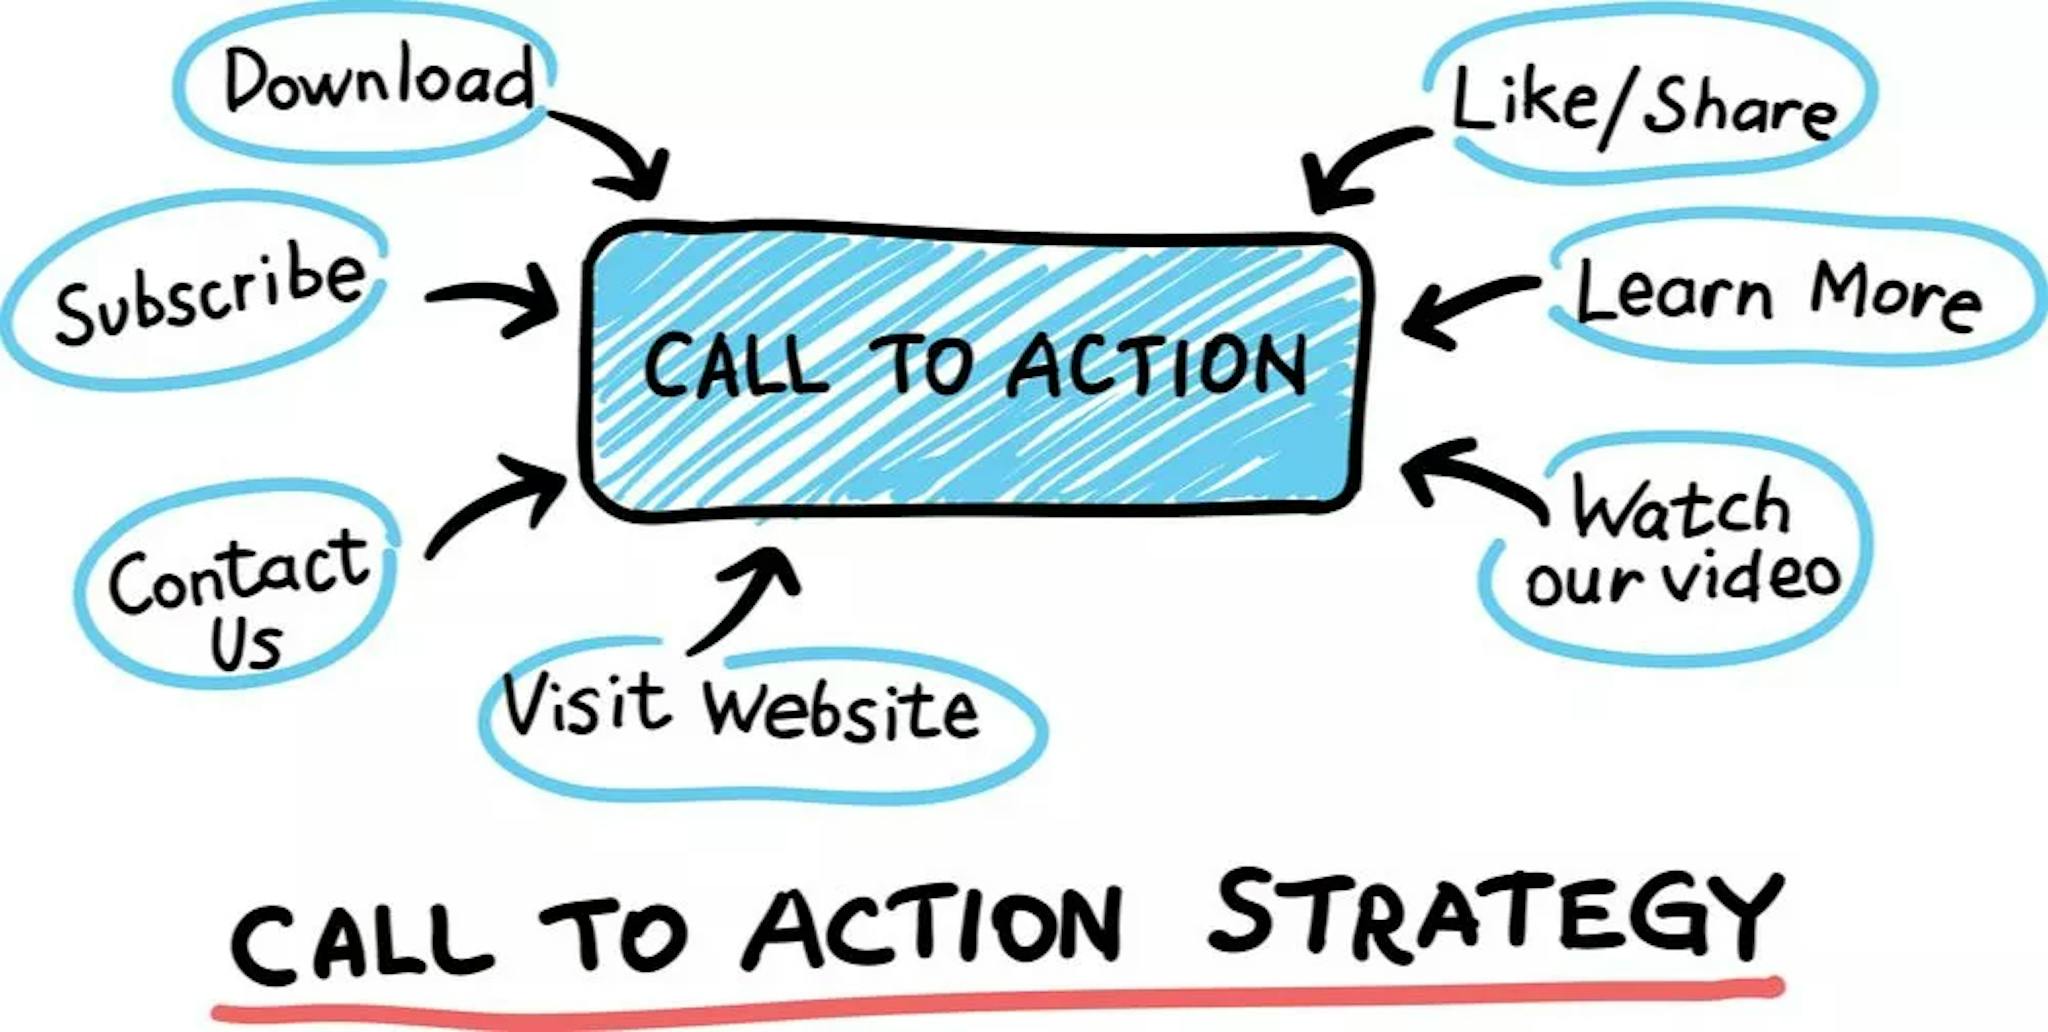 Source: https://jjlyonsmarketing.com/resources/how-to-use-a-call-to-action/